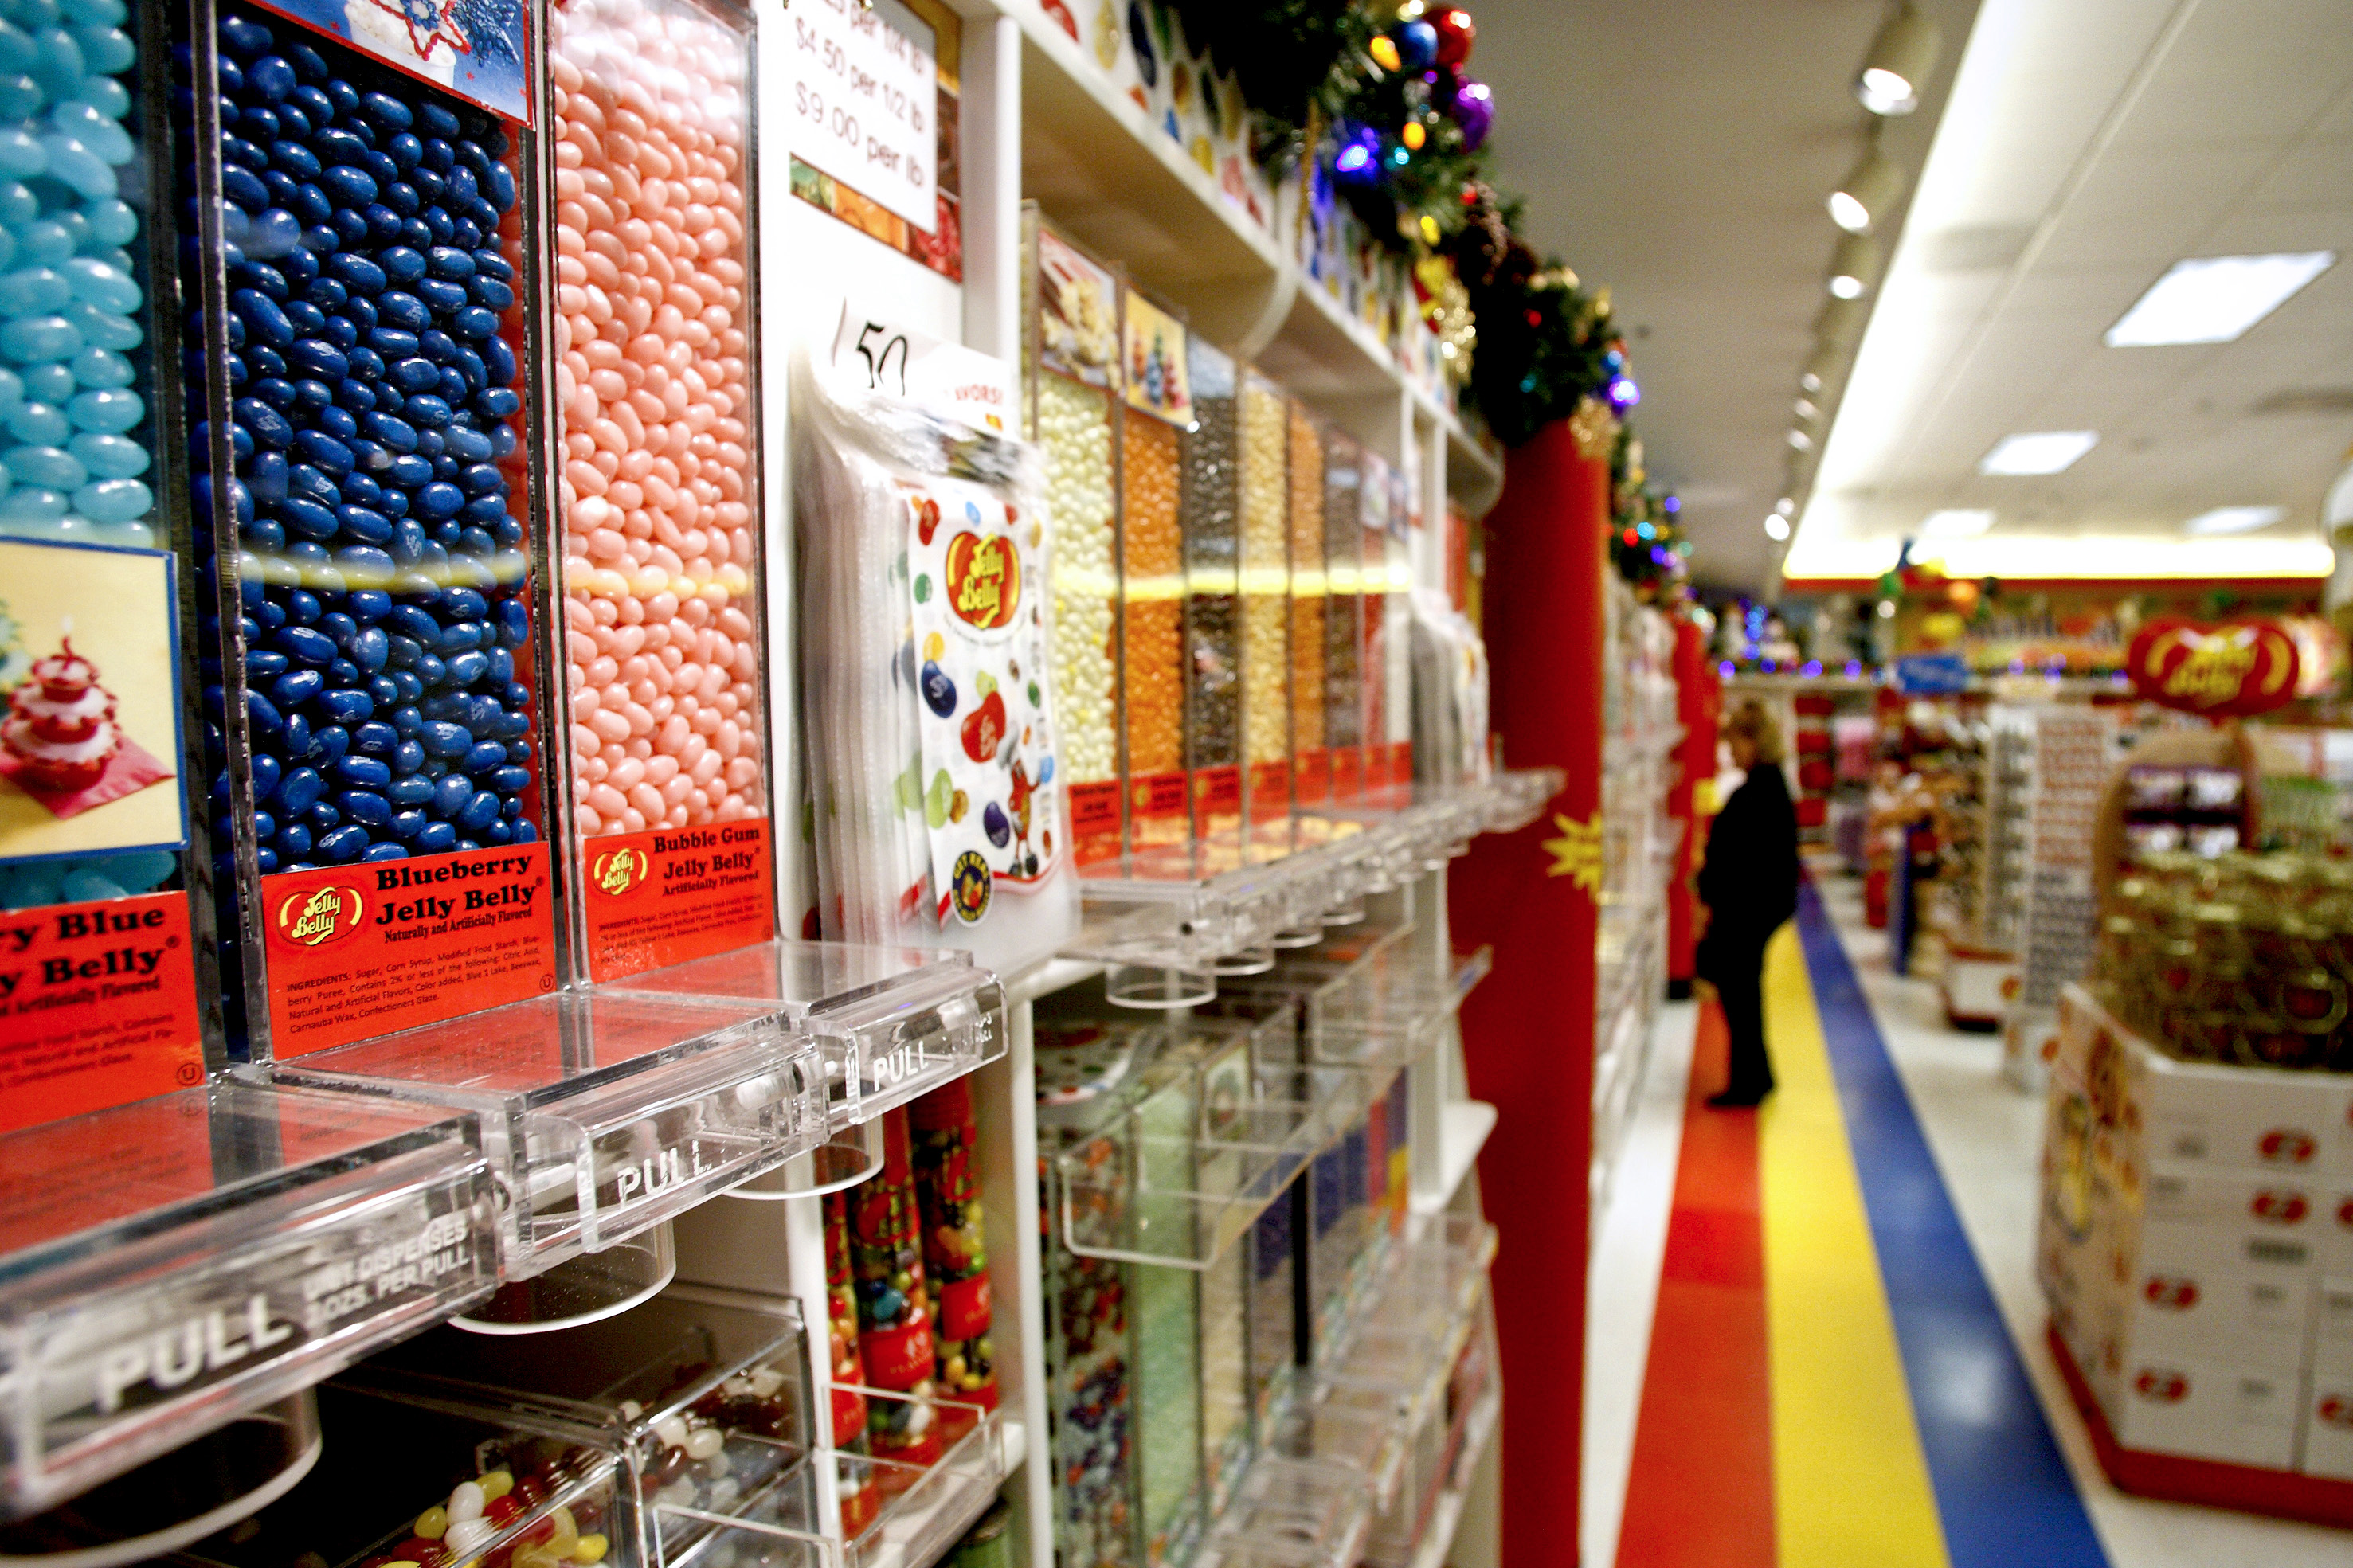 Jelly beans sit for sale at the Jelly Belly Candy Co. store next to the company's manufacturing facility in Fairfield, Calif., U.S., on Tuesday, Dec. 14, 2010. (Ken James—Bloomberg /Getty Images)